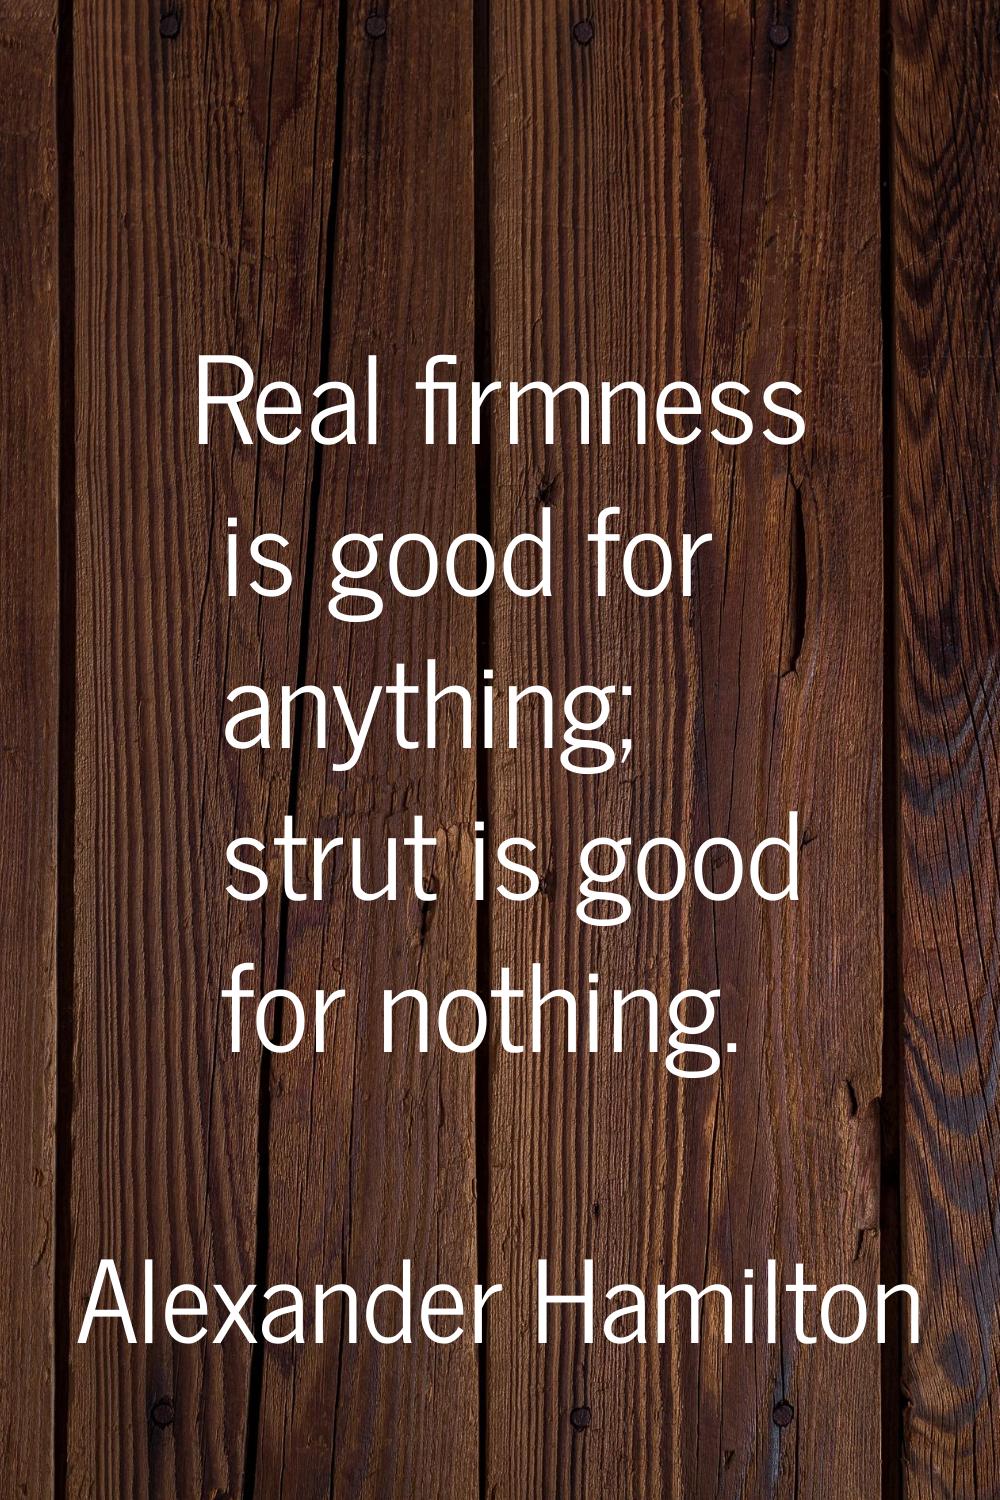 Real firmness is good for anything; strut is good for nothing.